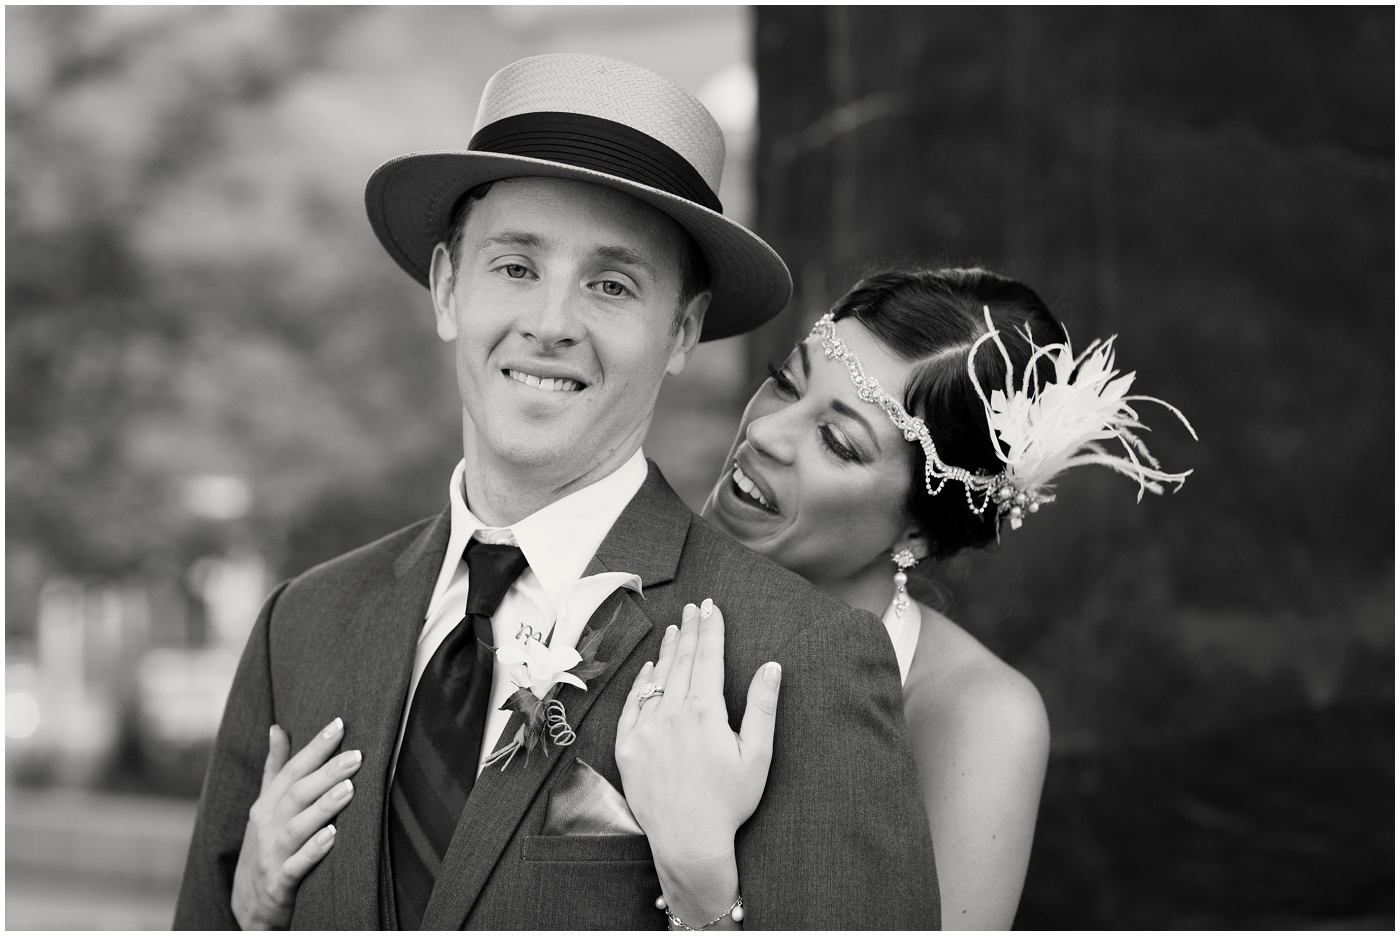 picture of 1920s style bride & groom